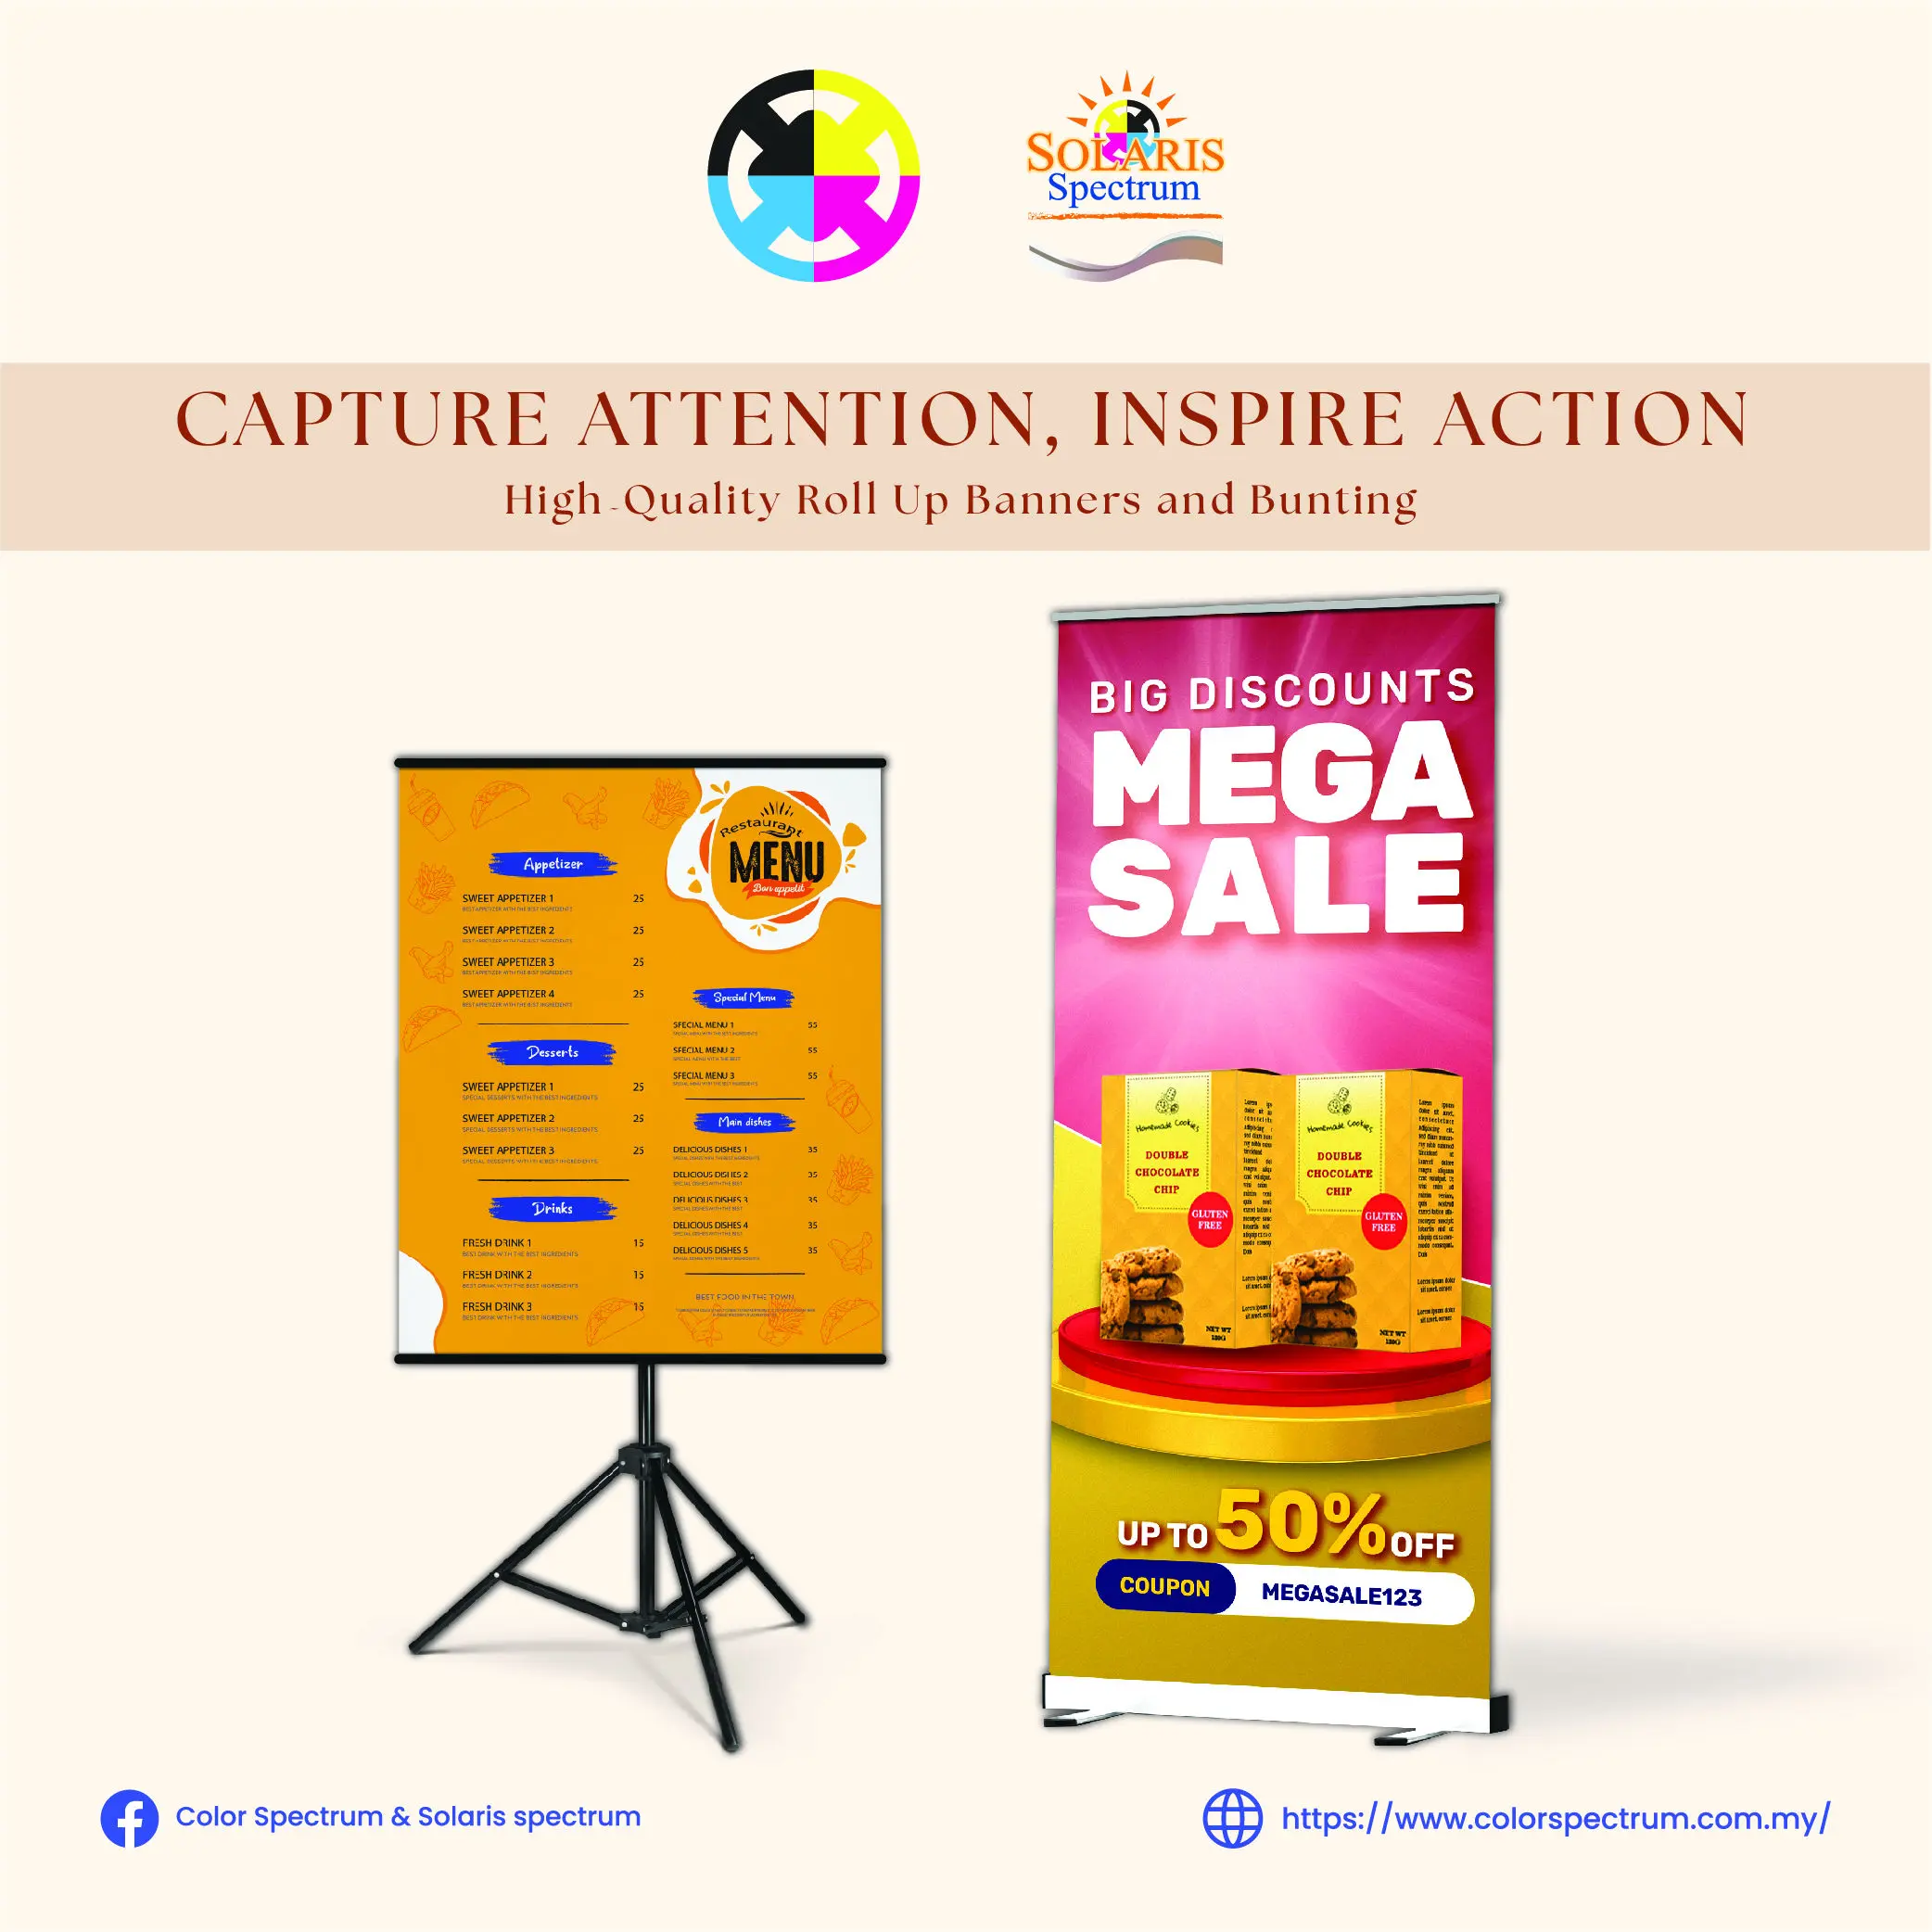 8) High Quality Roll Up Banners and Bunting